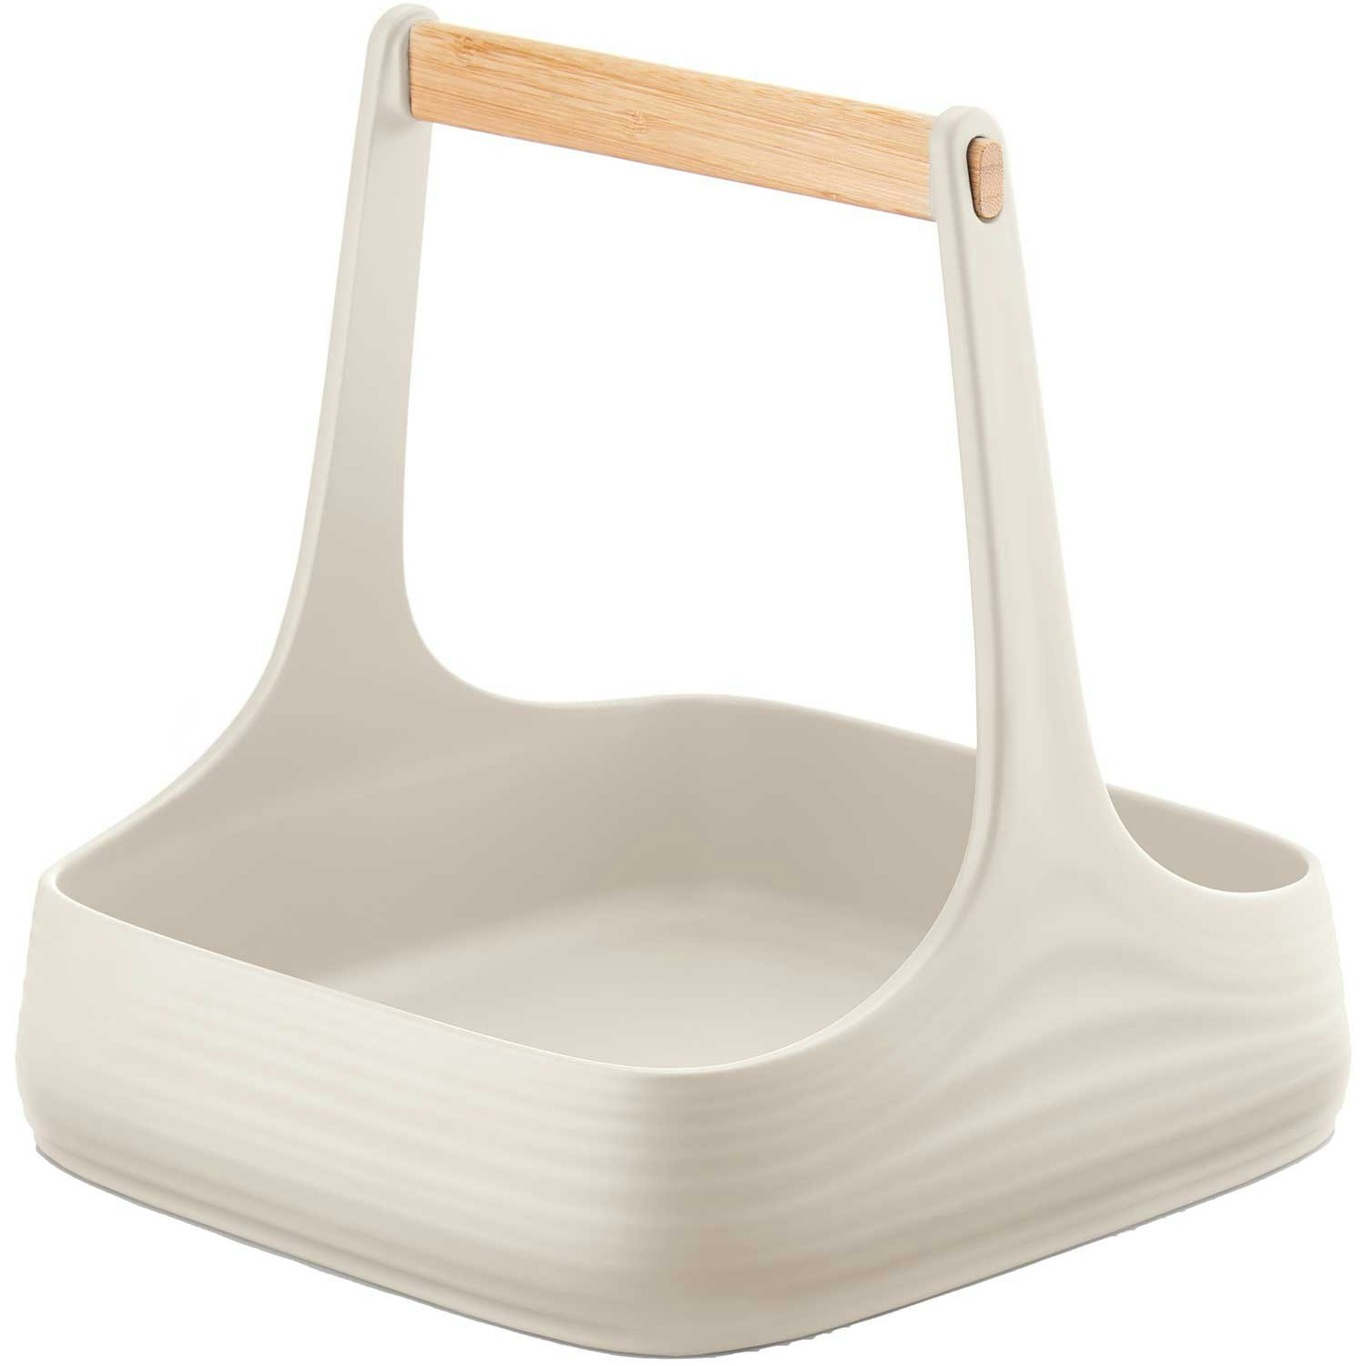 Tierra All Together Tray 22x22 cm, White